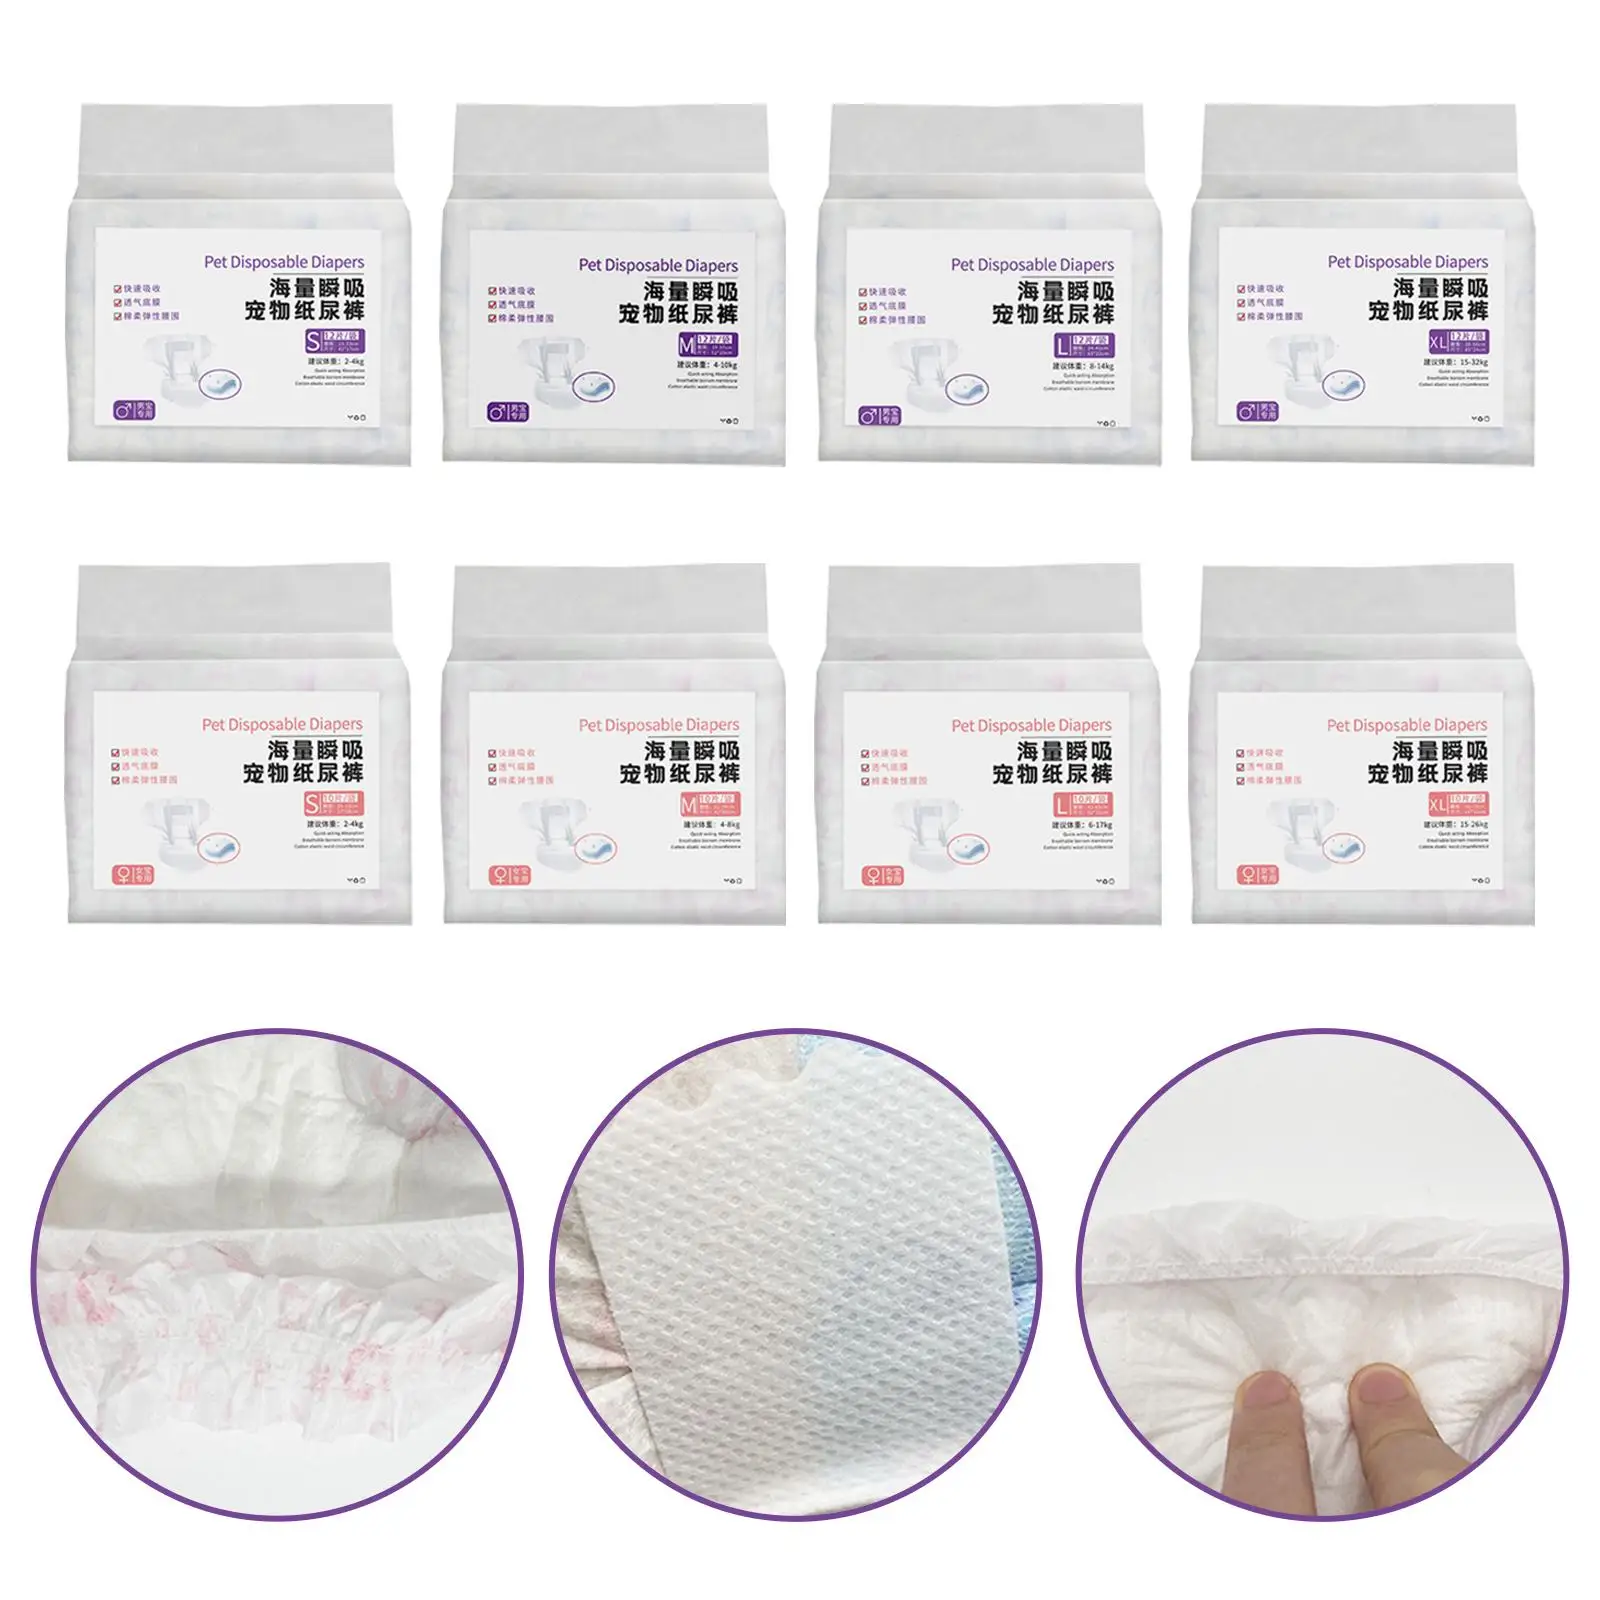 Dog Diapers Leakproof Nappies Super Absorption Soft Disposable Comfort Dog Wraps for Dogs Puppy Excitable Urination Incontinence